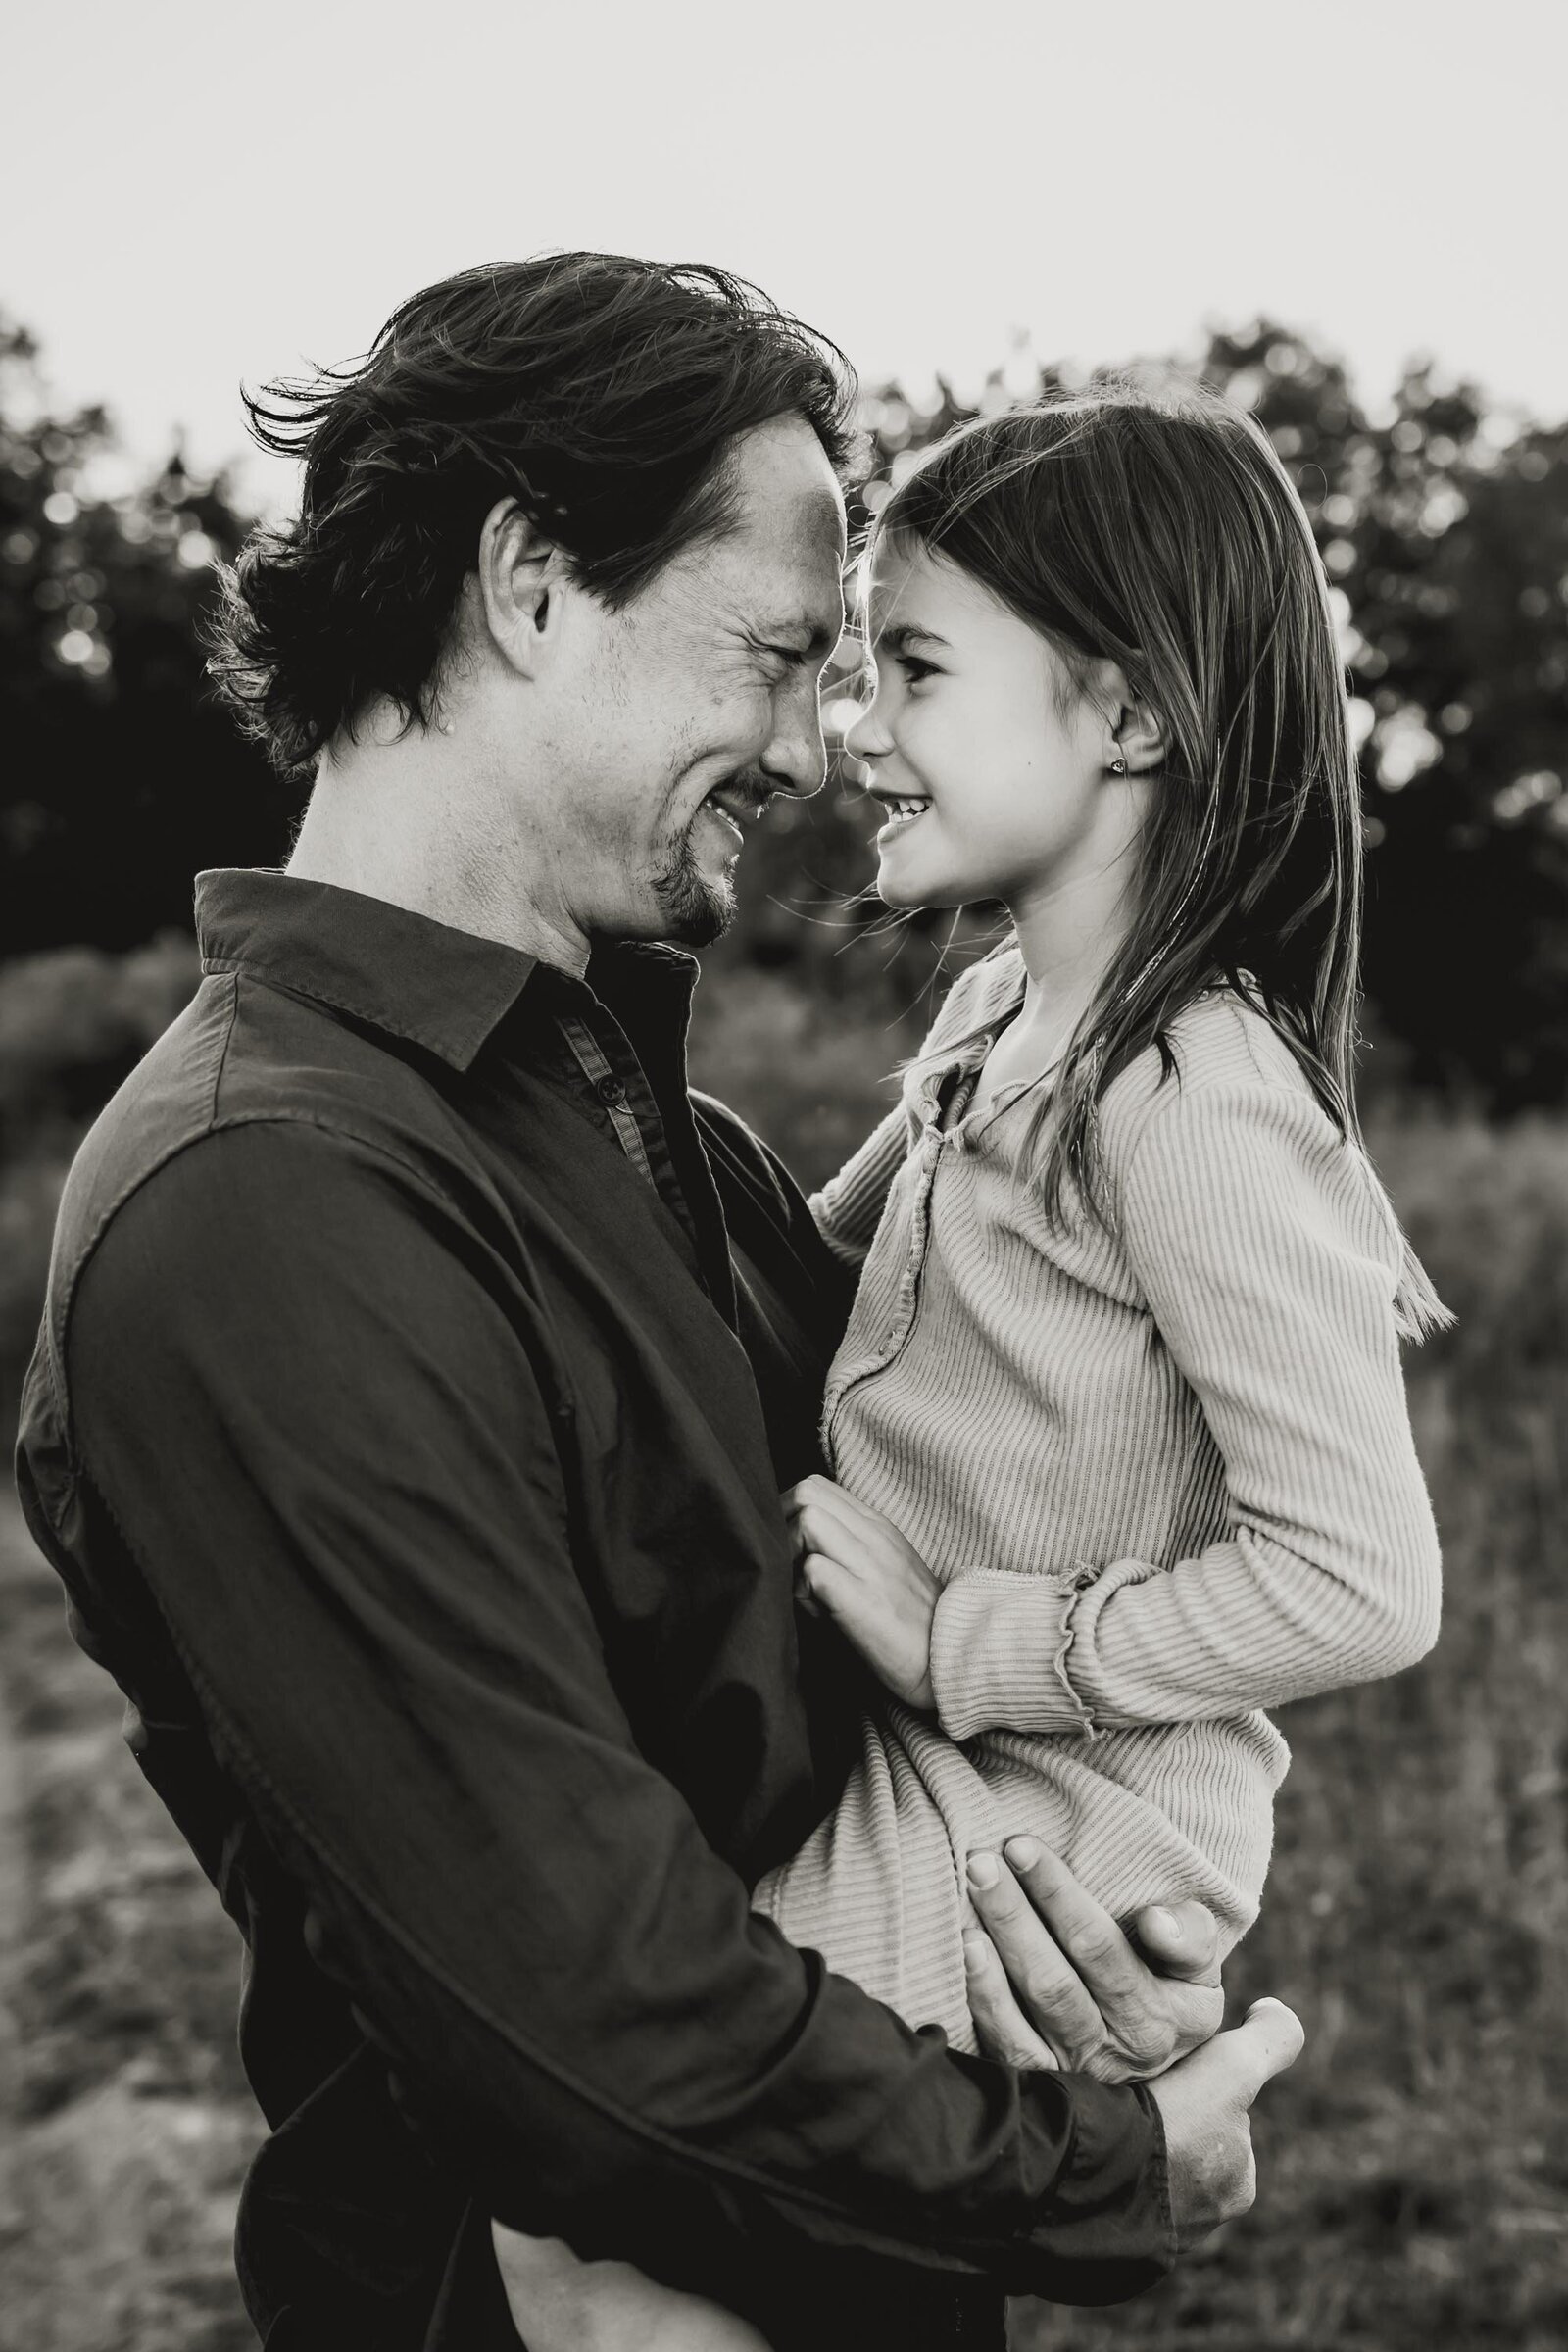 father and daughter form Southlake Texas embrace and laugh